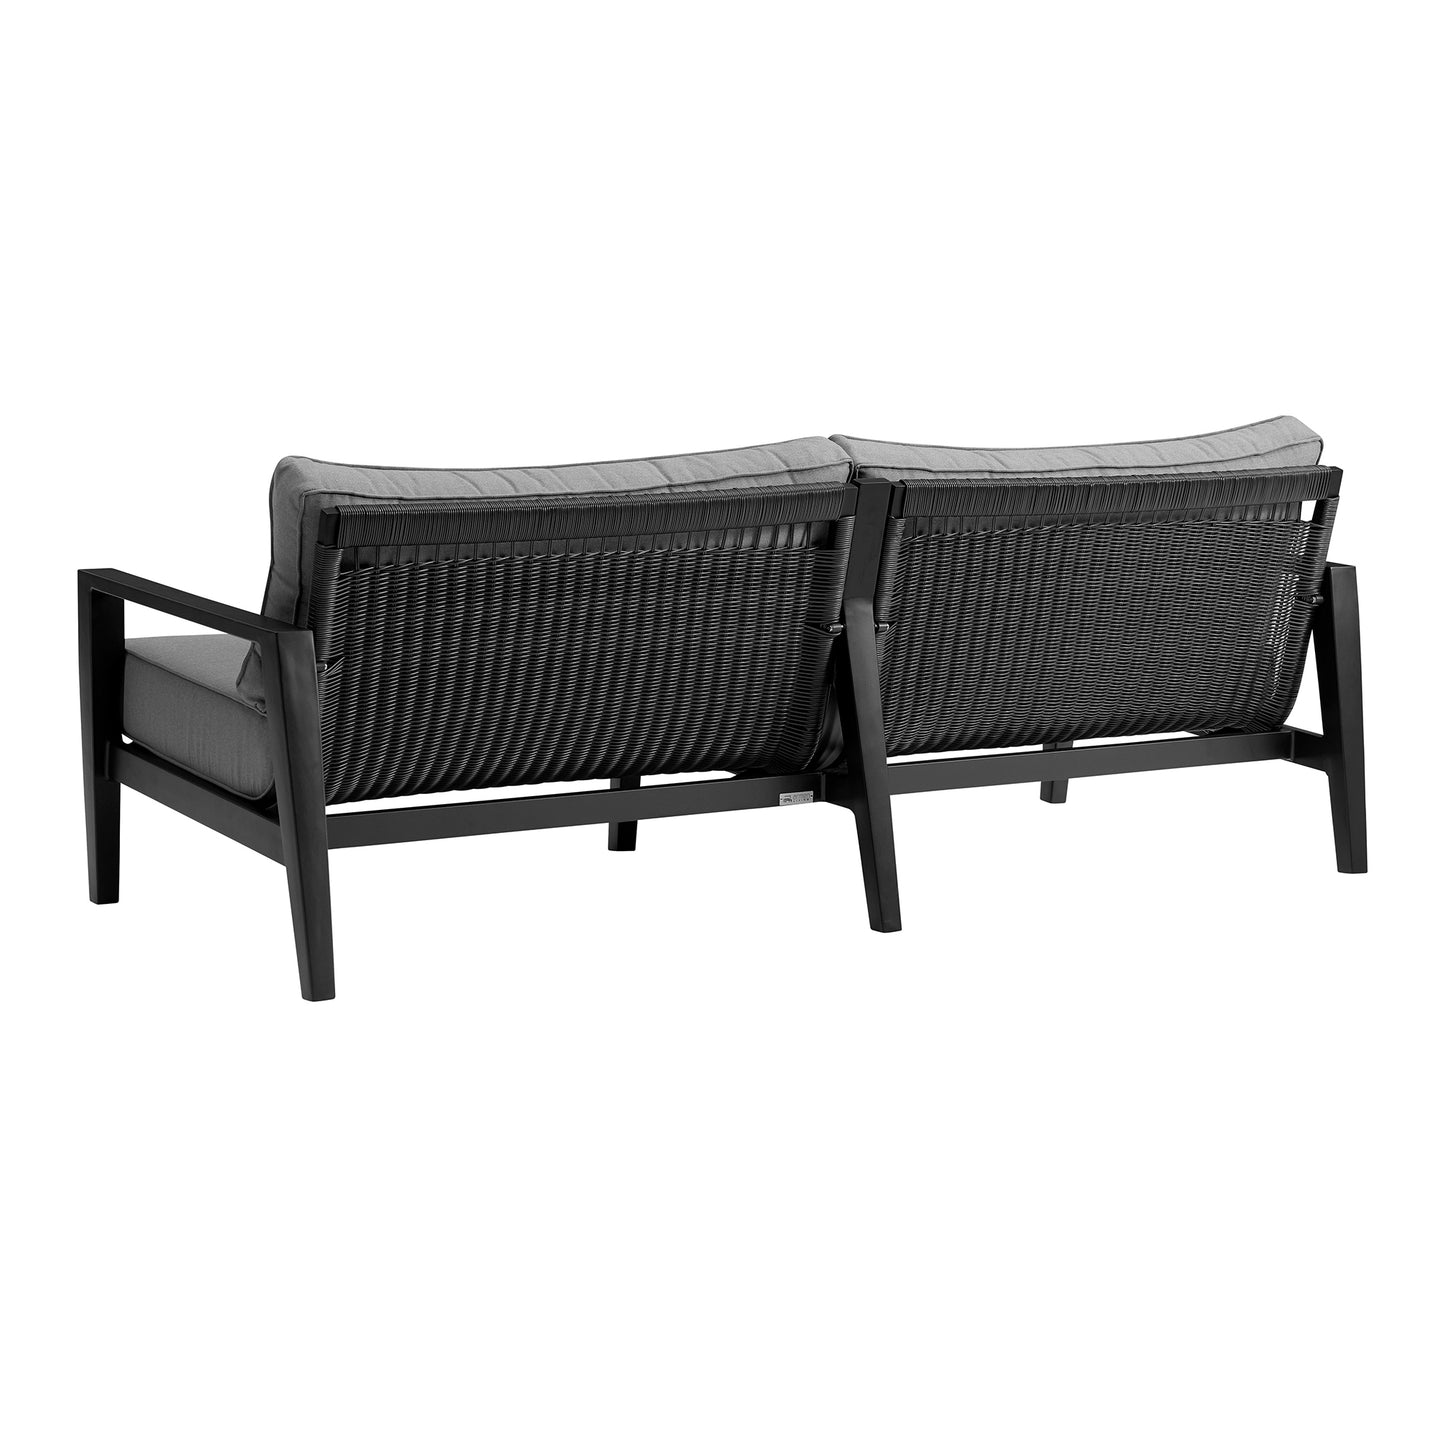 Cayman 4 Piece Black Aluminum Outdoor Seating Set with Dark Gray Cushions